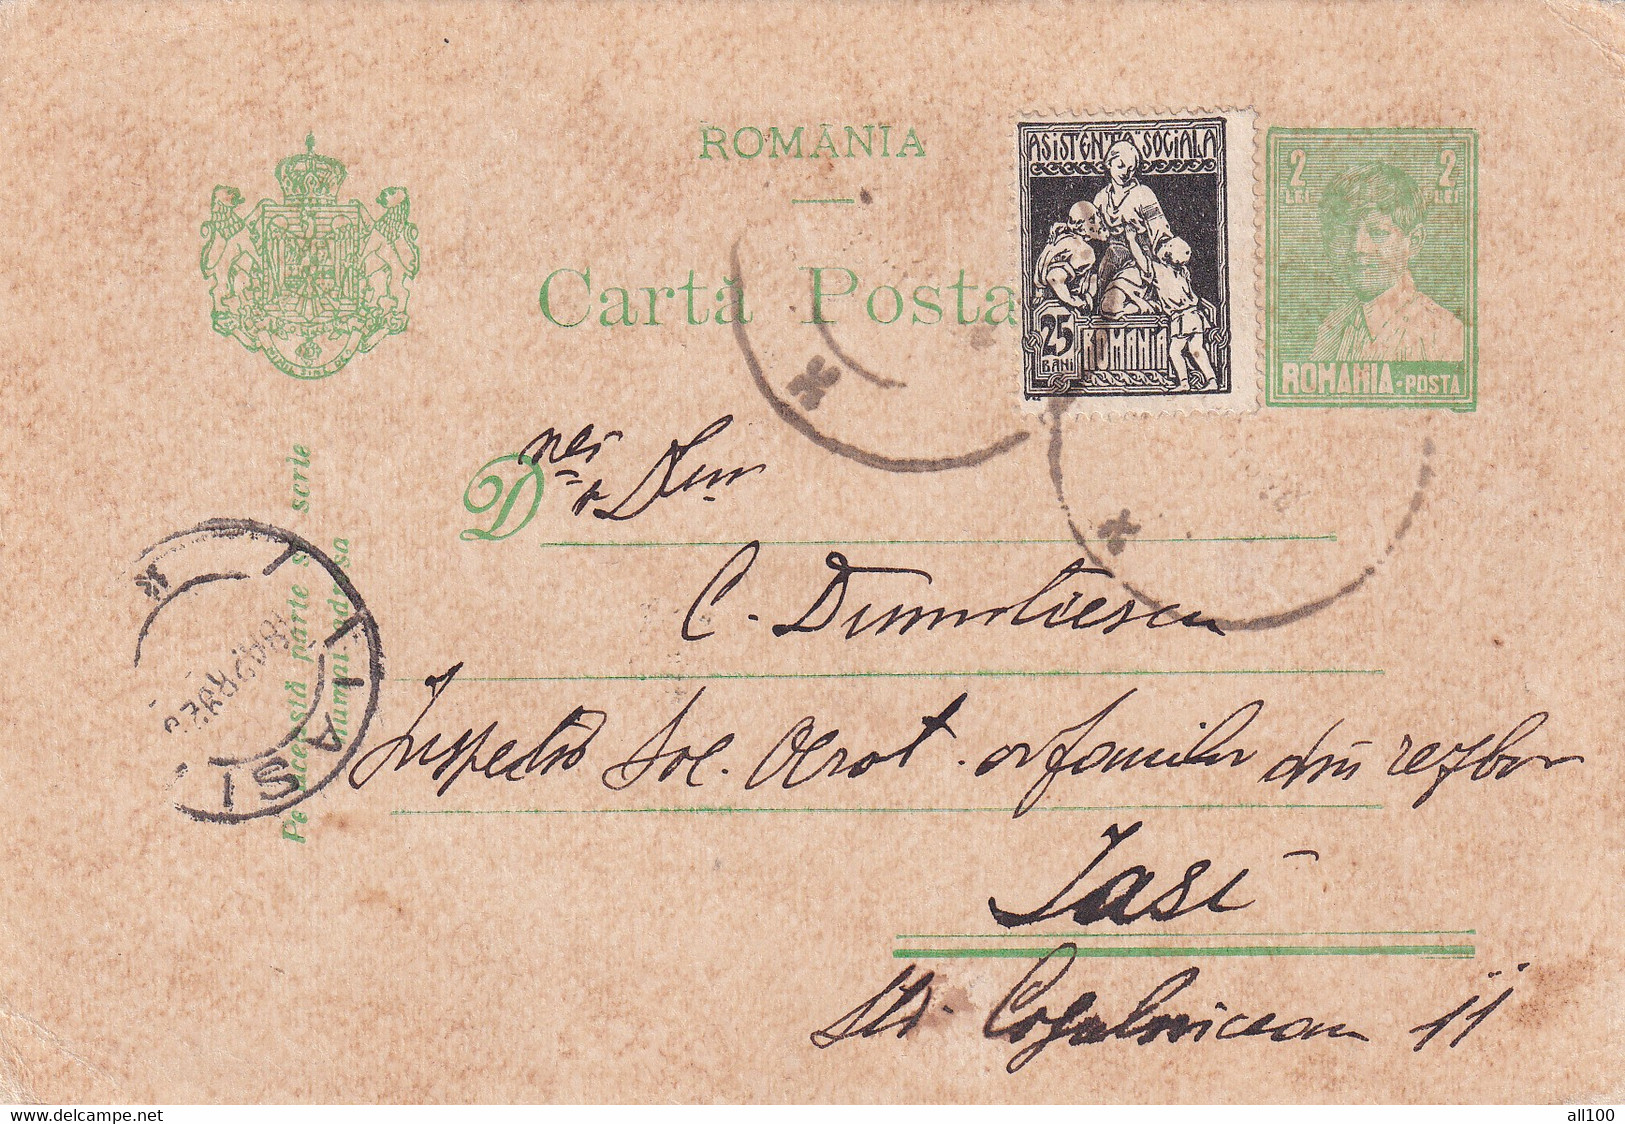 A 16515 - CARTA POSTALA 1928 SENT TO IASI KING MICHAEL 2LEI  STATIONARY STAMP - Used Stamps